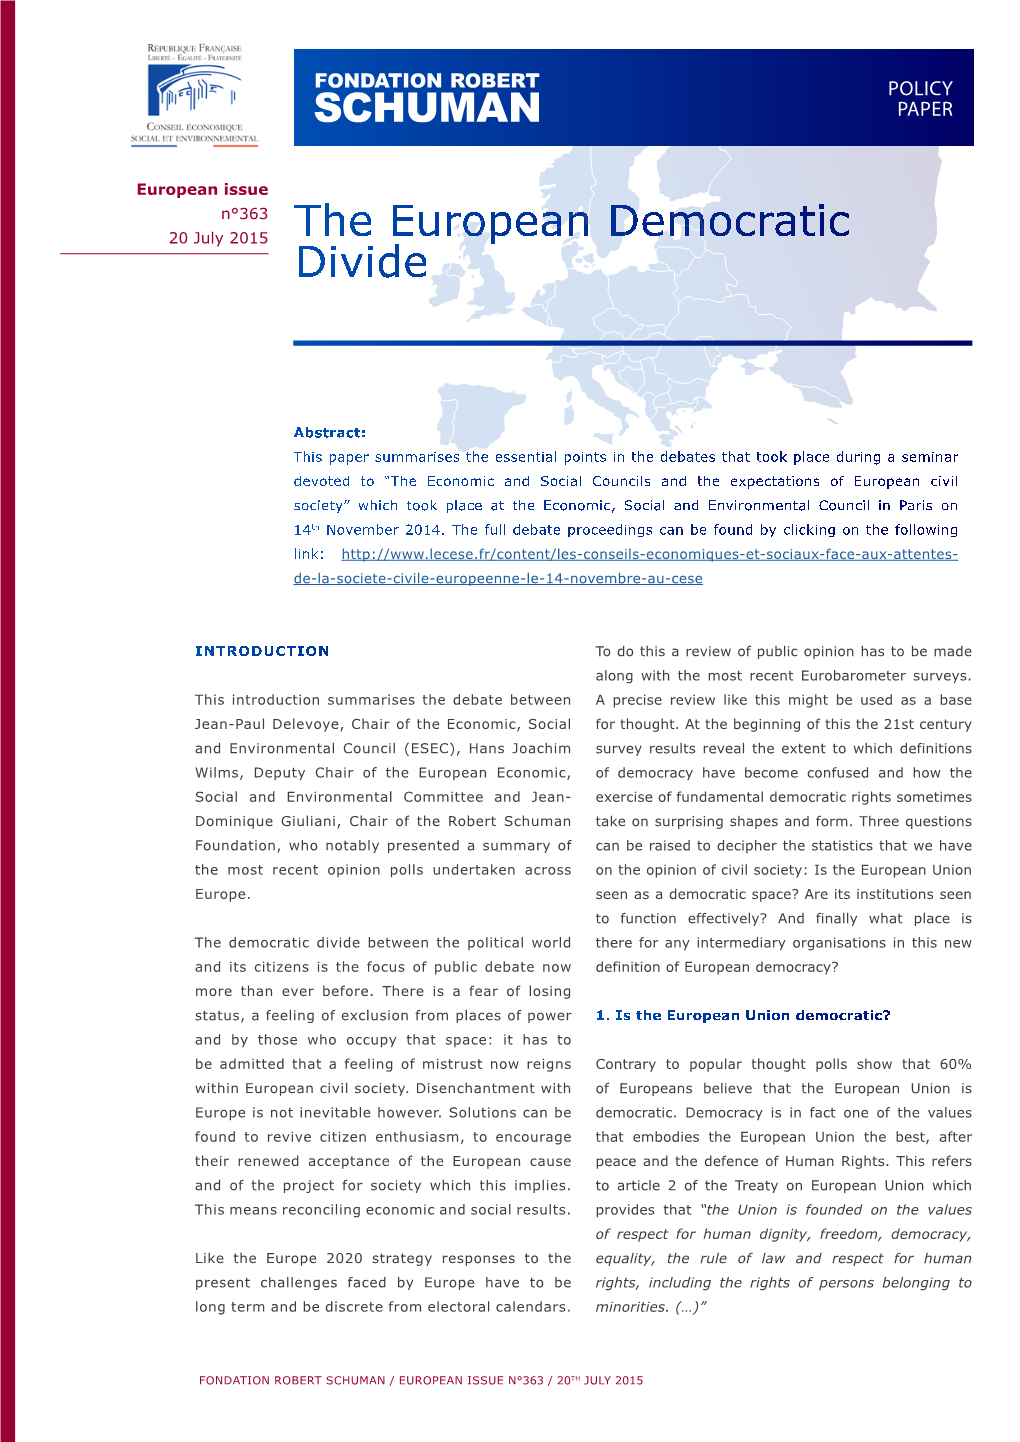 Economic and Social Councils and the European Democratic Divide